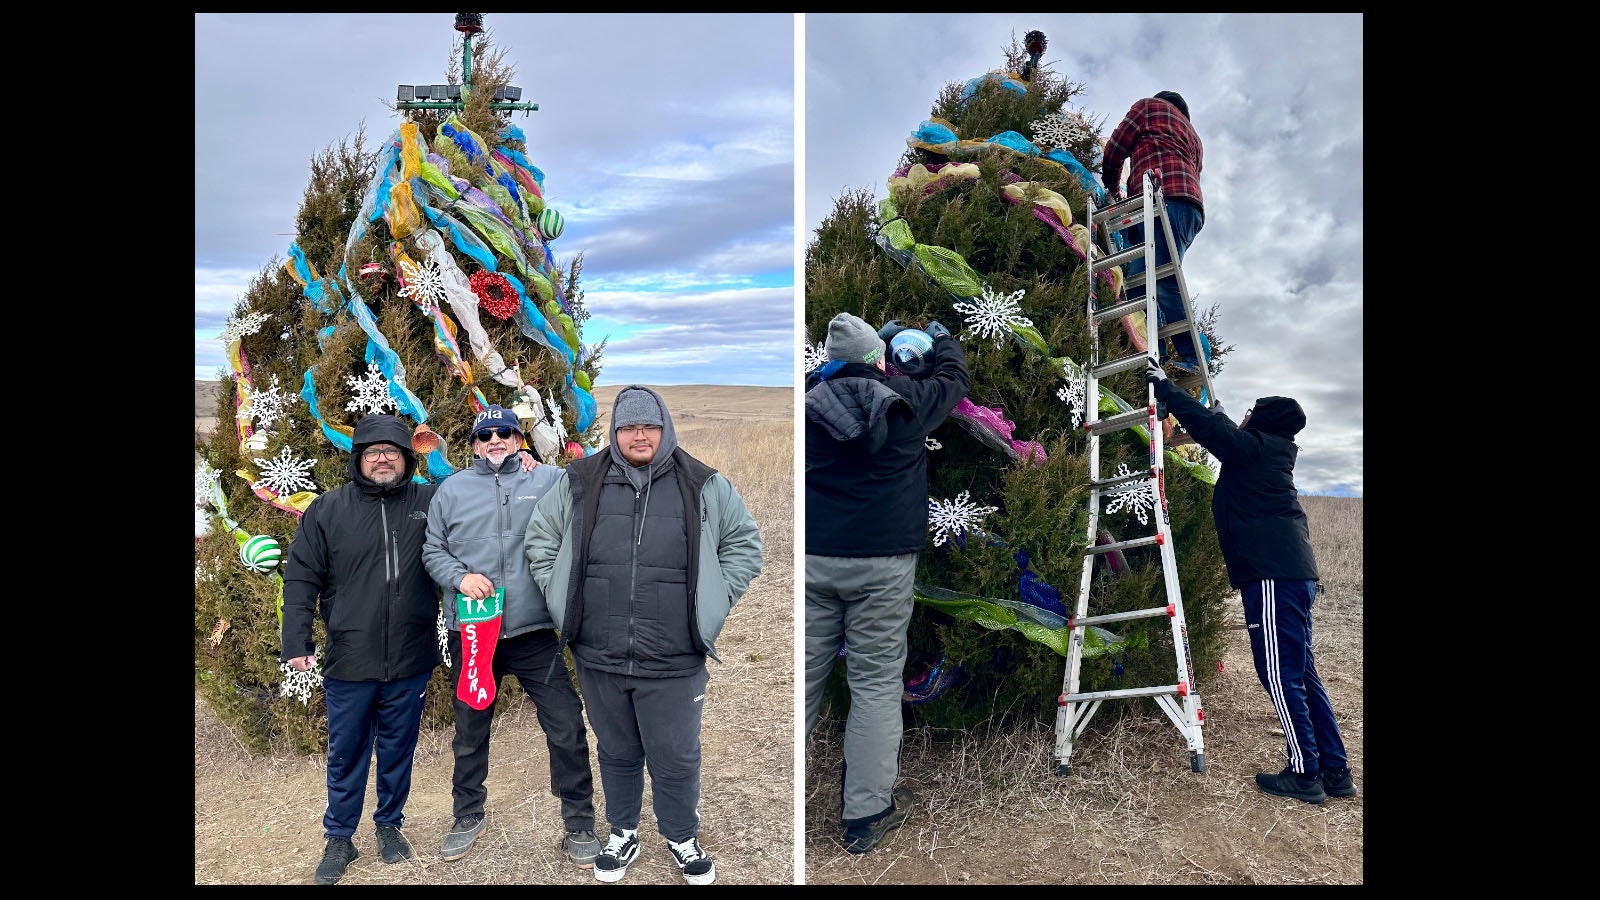 German Segura, center, and friends from Texas Juan Carlos Rangel and Juan Carlos Rangel Jr. decorate the festive tree along Sgura's long-haul trucking route from Texas to Calgary.